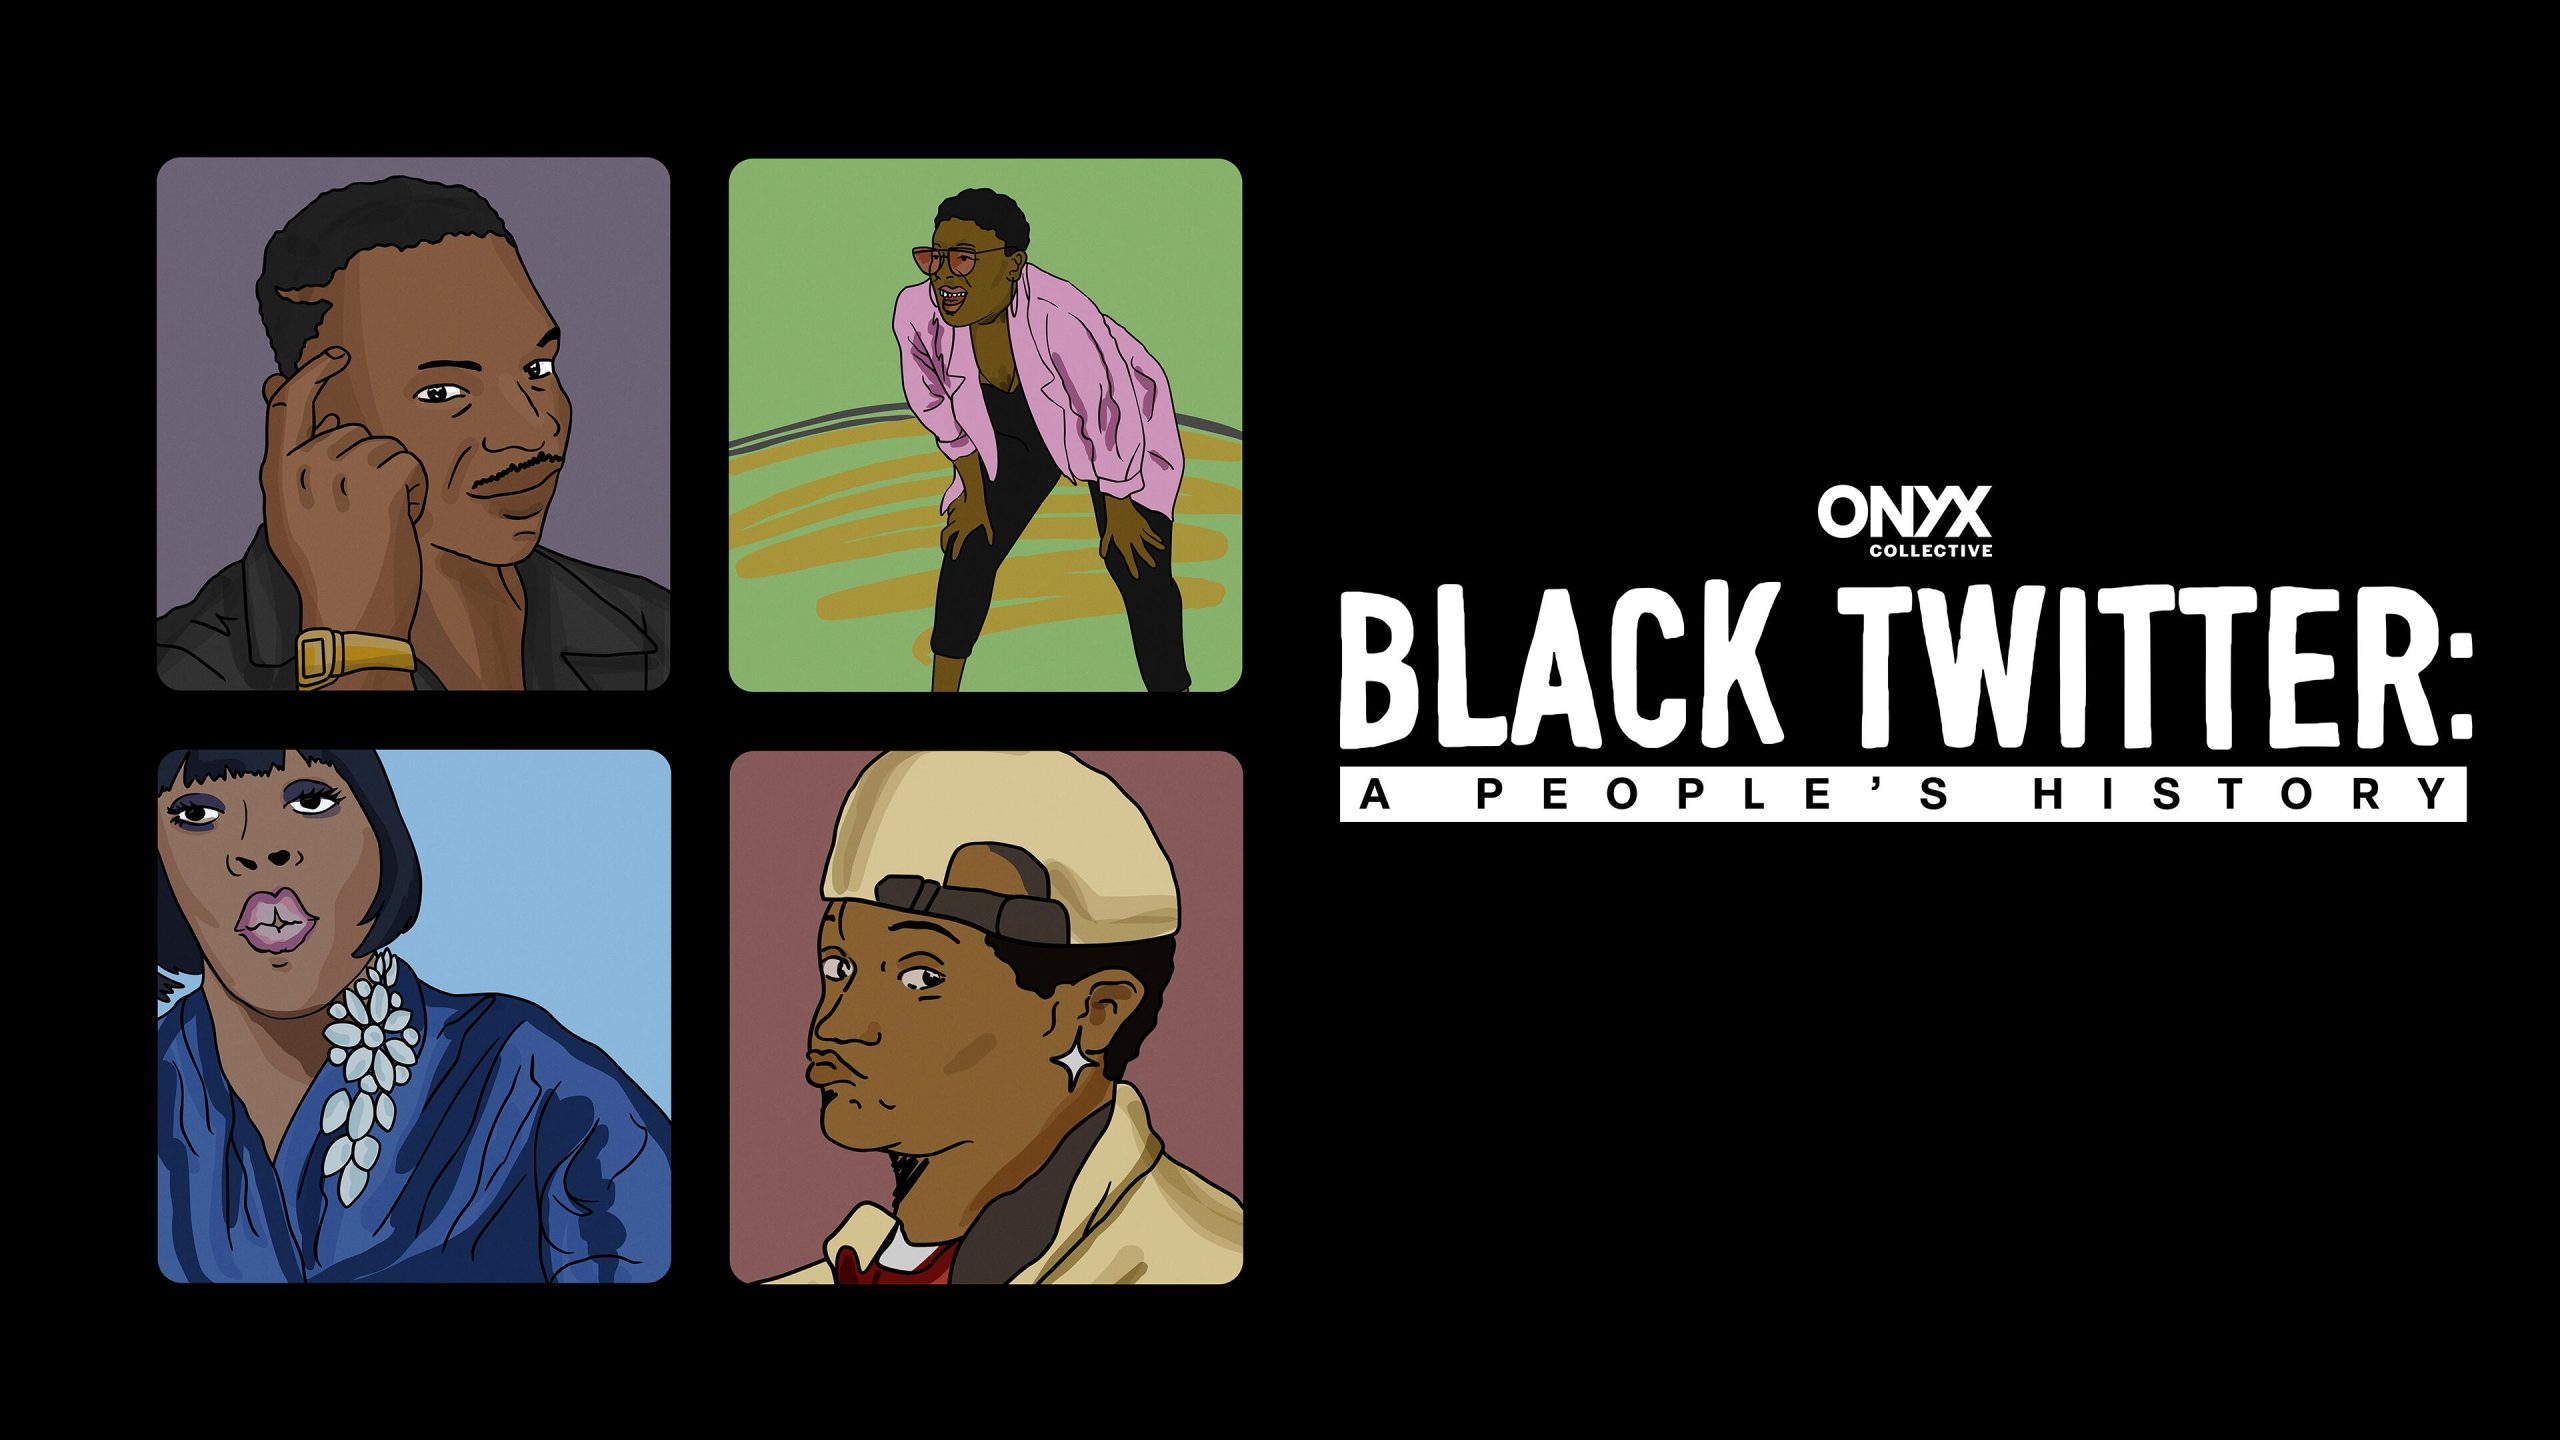 Black Twitter: A People’s History -- Based on Jason Parham’s WIRED article “A People’s History of Black Twitter,” this three-part docuseries charts the rise, the movements, the voices and the memes that made Black Twitter an influential and dominant force in nearly every aspect of American political and cultural life.(Courtesy of Disney)